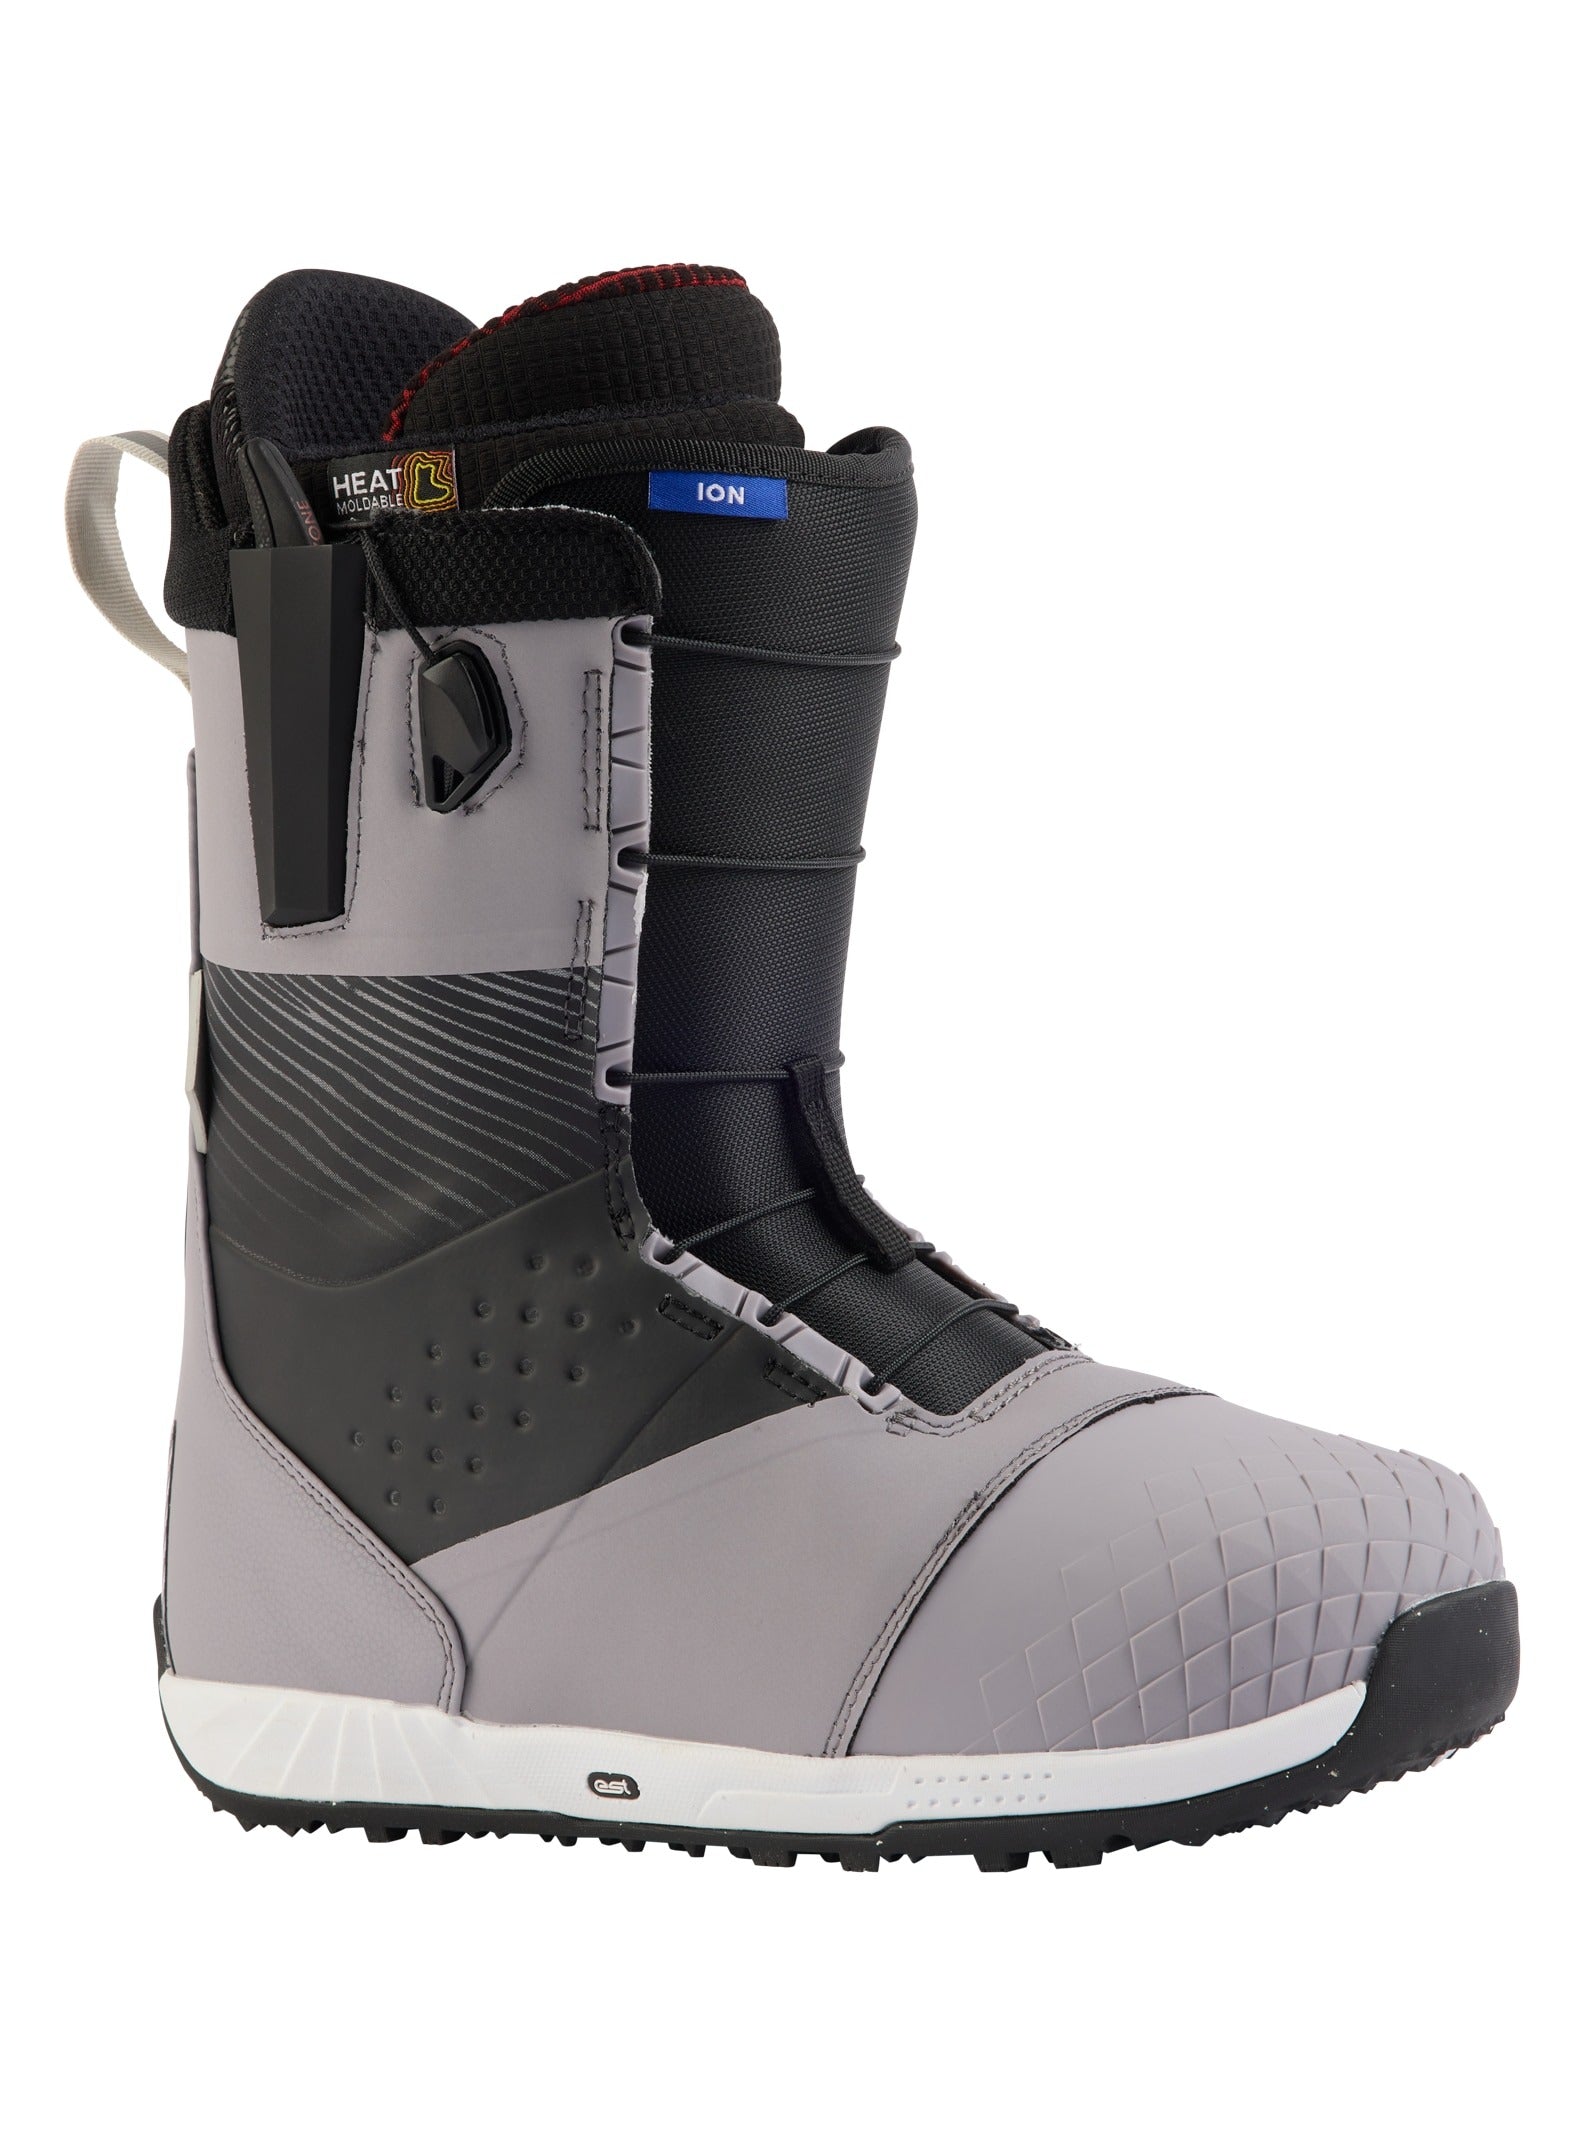 Men's Ion Snowboard Boots (Wide)